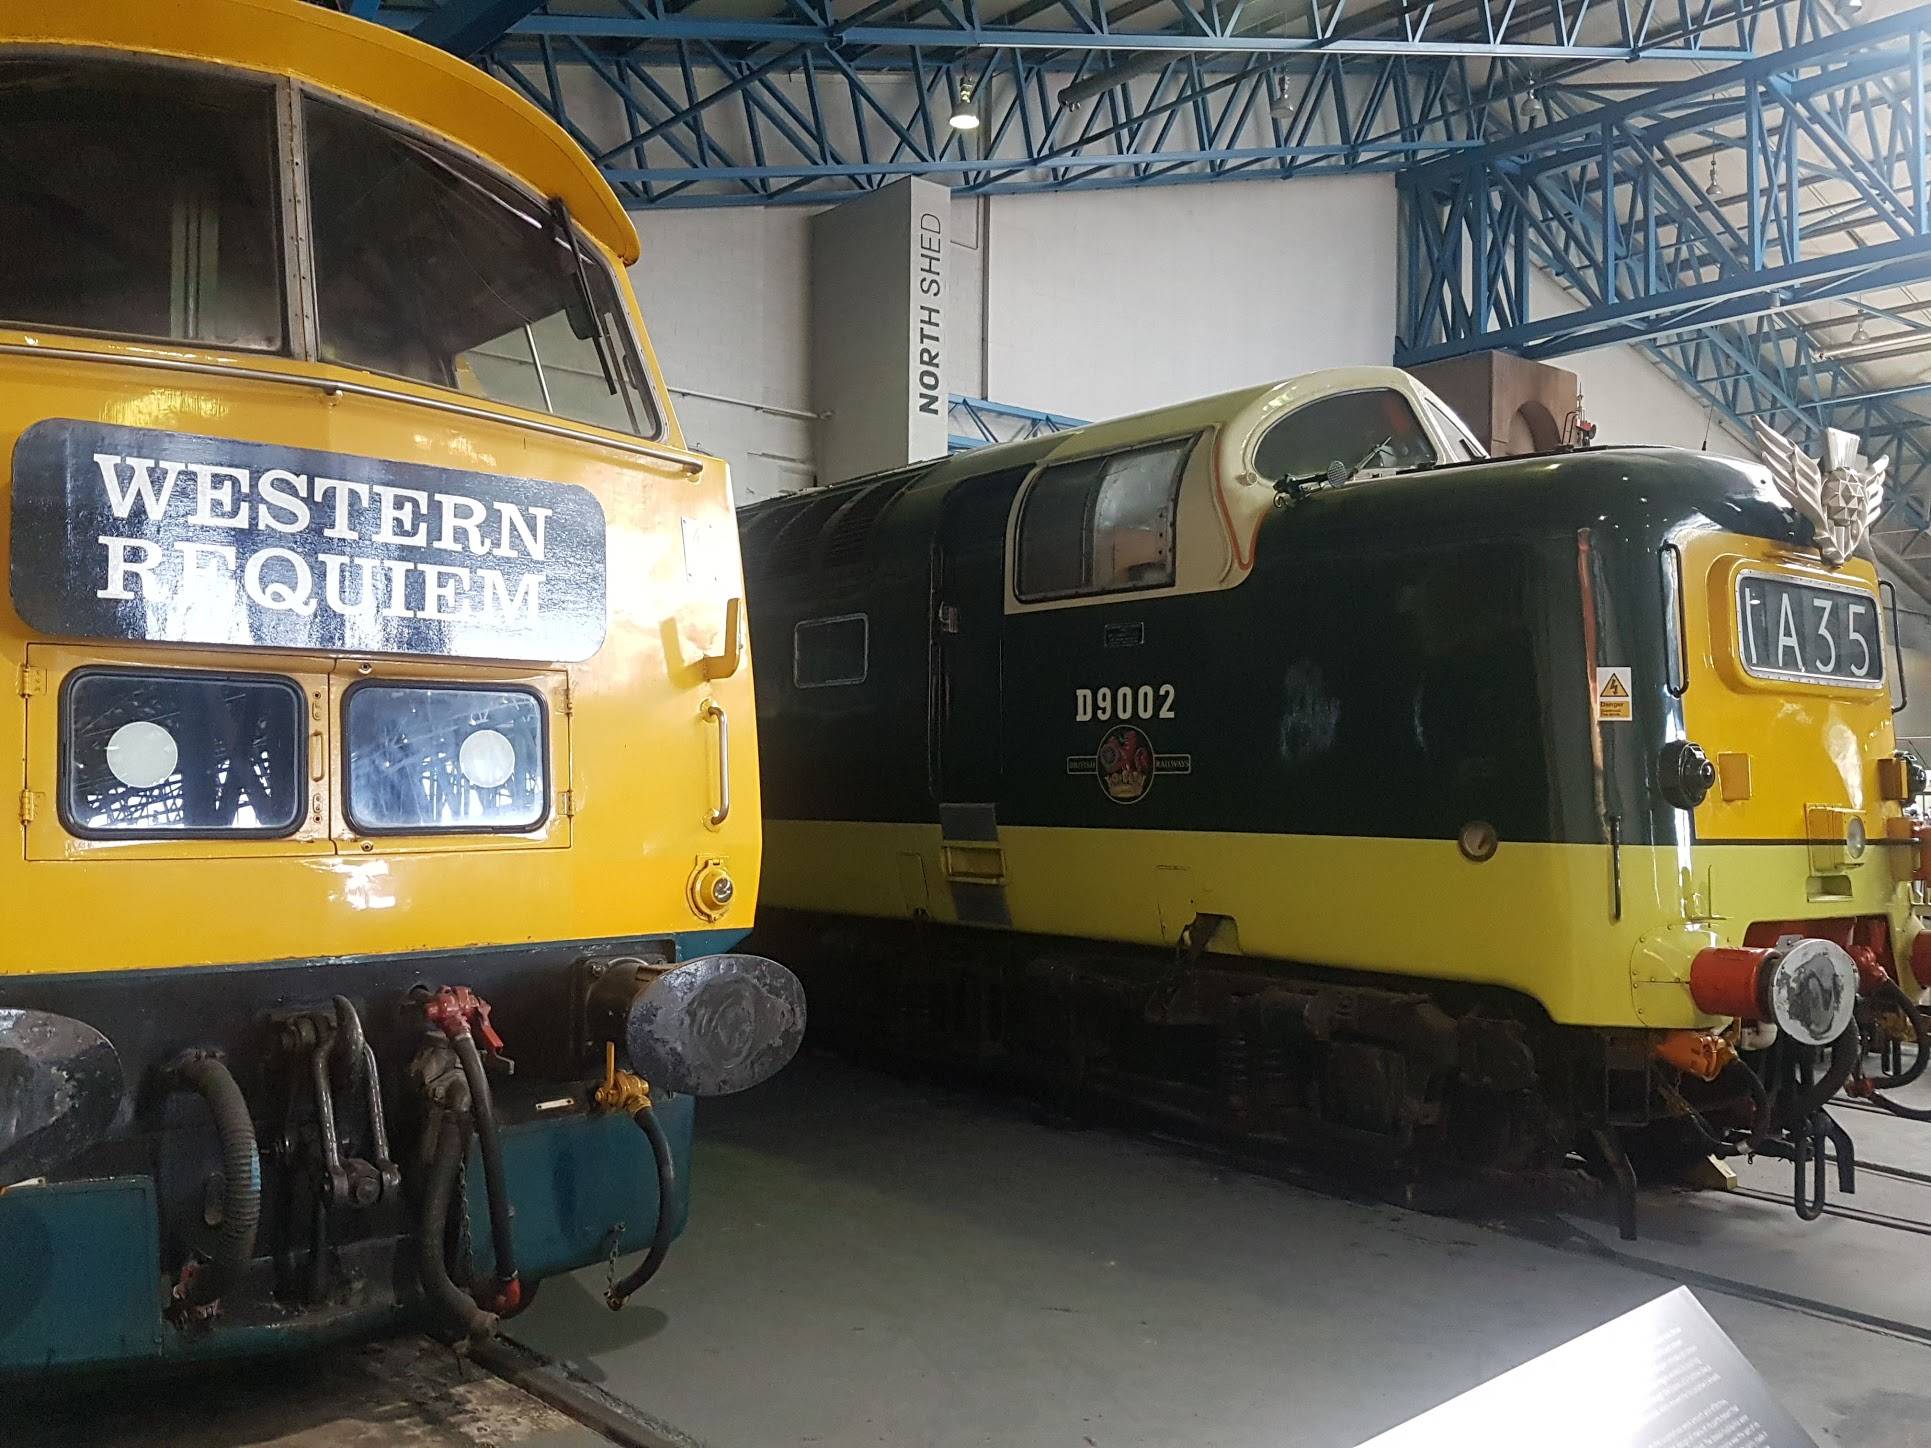 The National Railway Museum: Probably the best museum in the world!